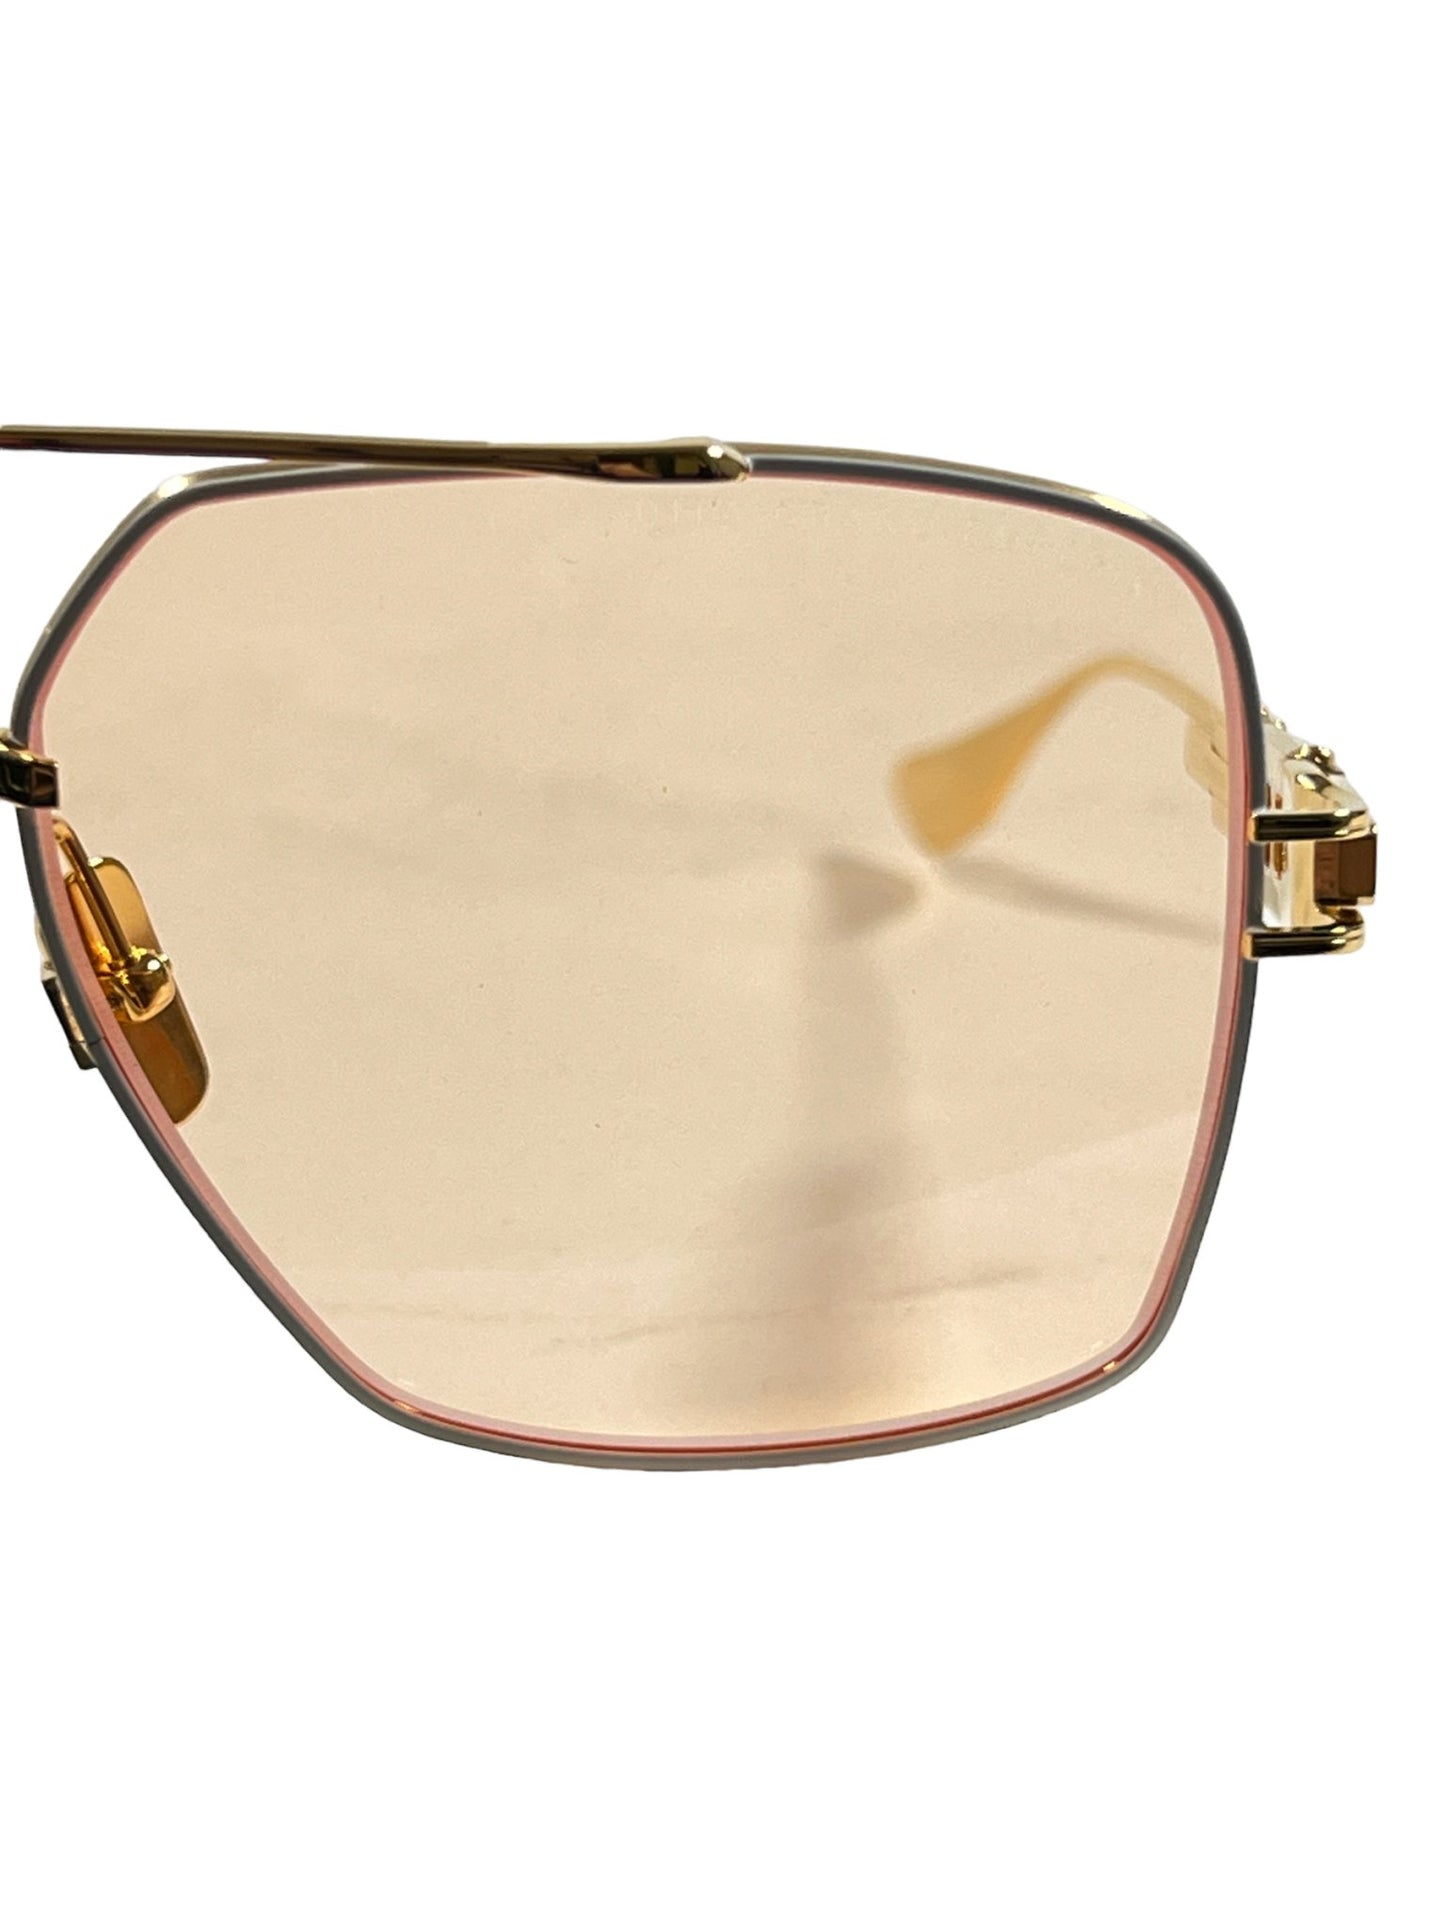 A pair of DITA luxury gold aviator sunglasses with titanium temples on a white background.